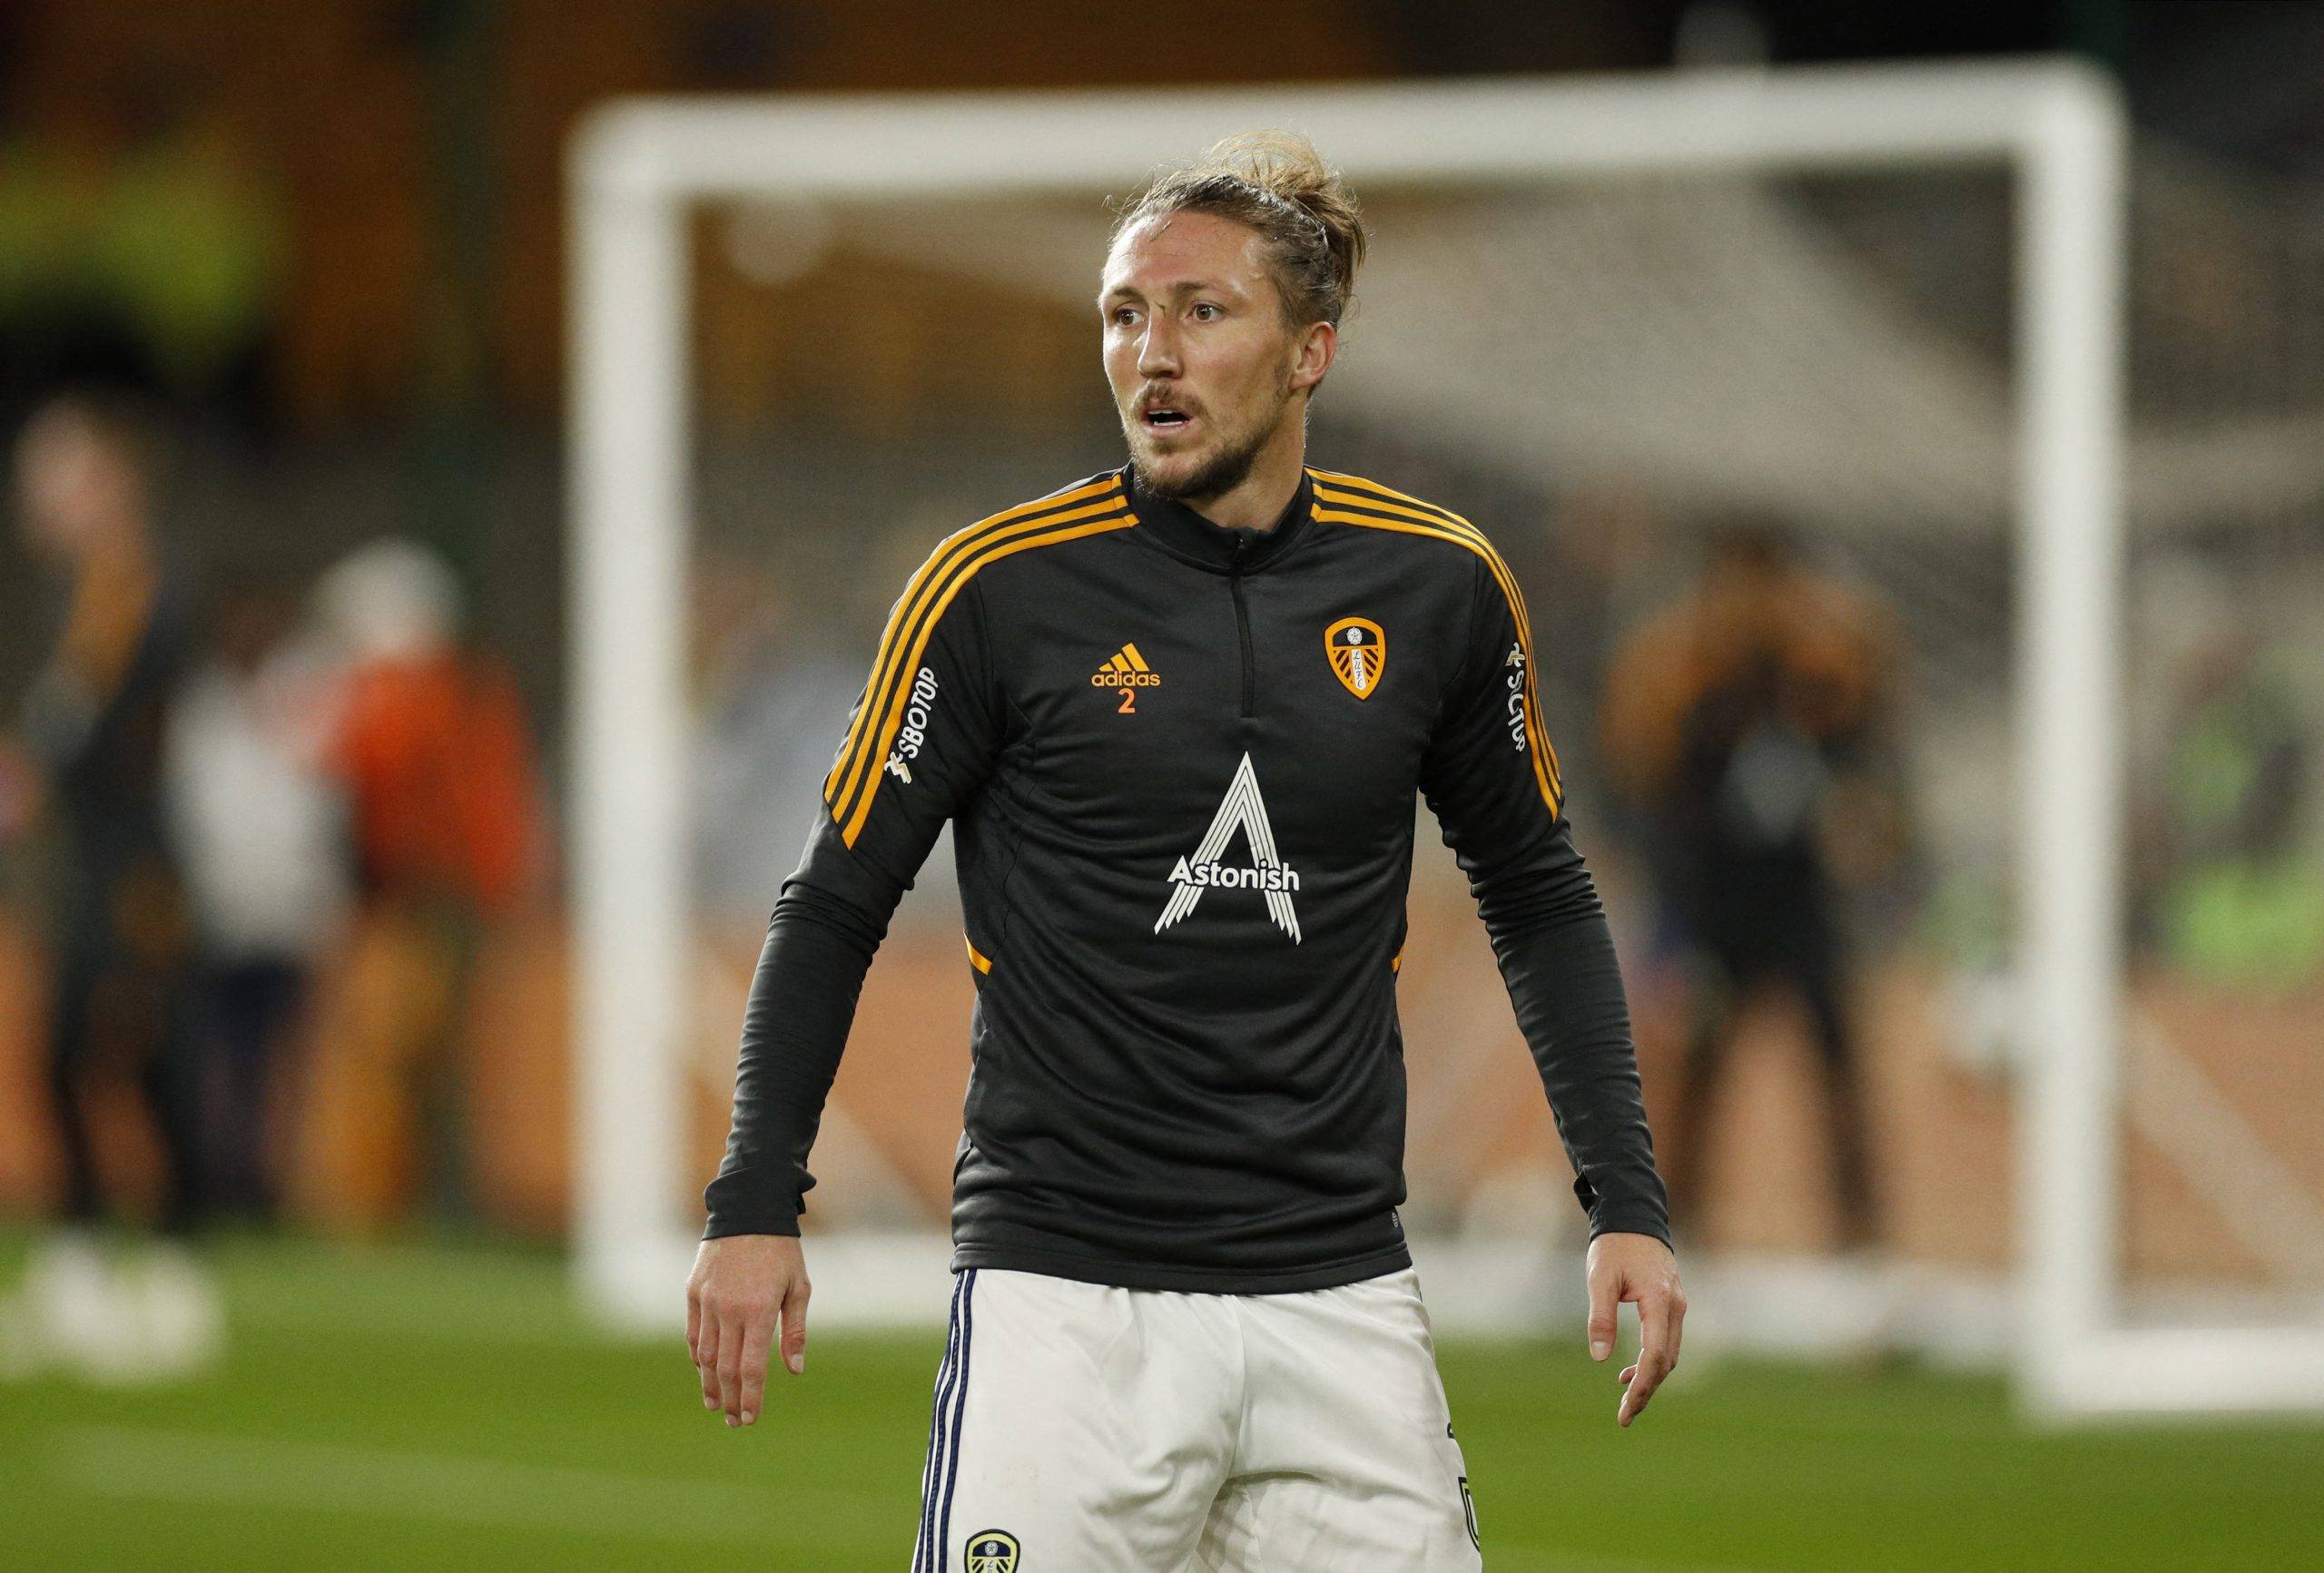 Leeds: Luke Ayling never planned to leave Whites - Follow up